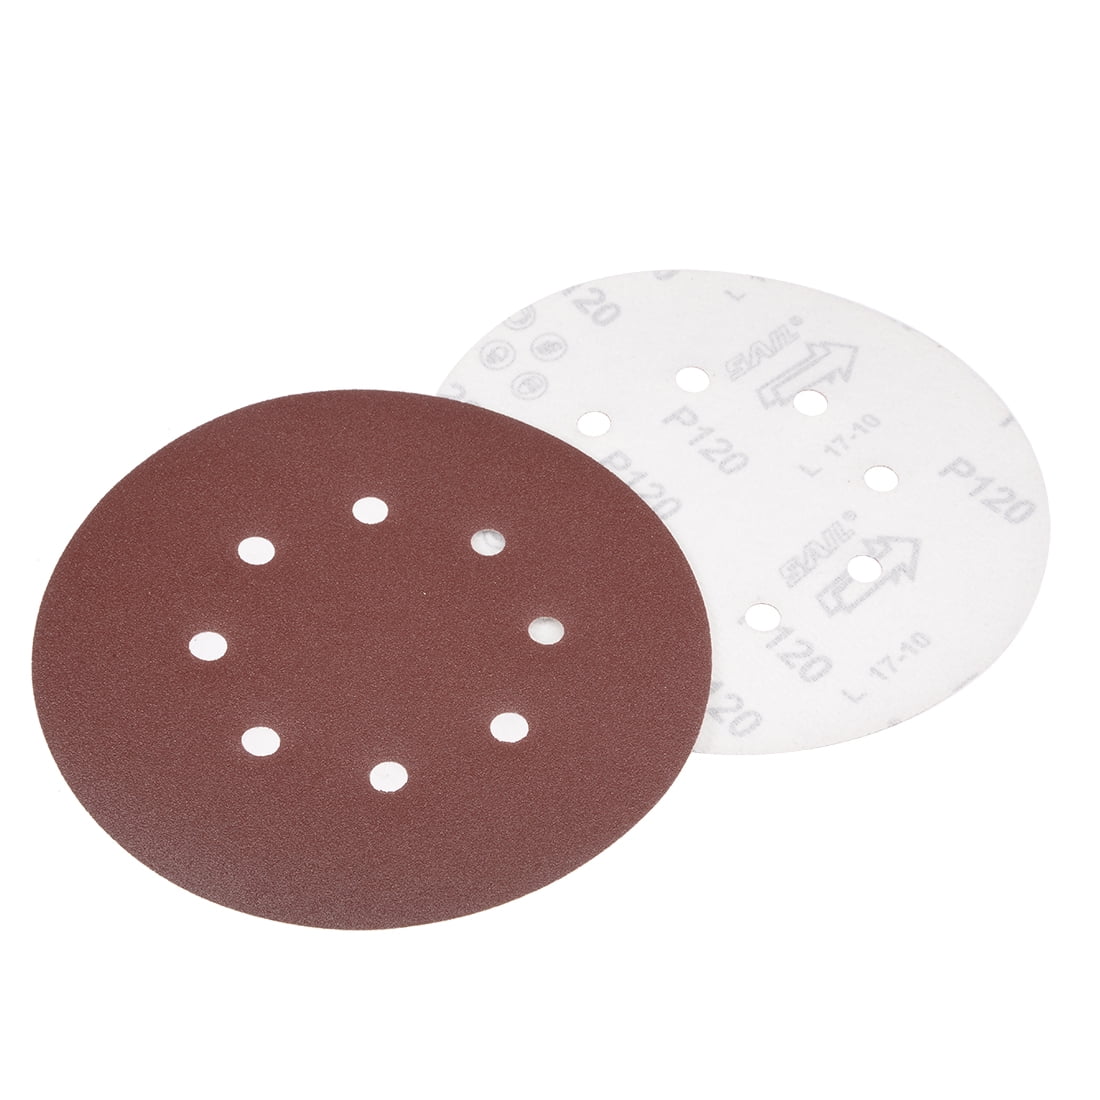 uxcell 7 Inch Gray Dry Sanding Discs Flocking Sandpaper 5000 Grits 10 Pcs 